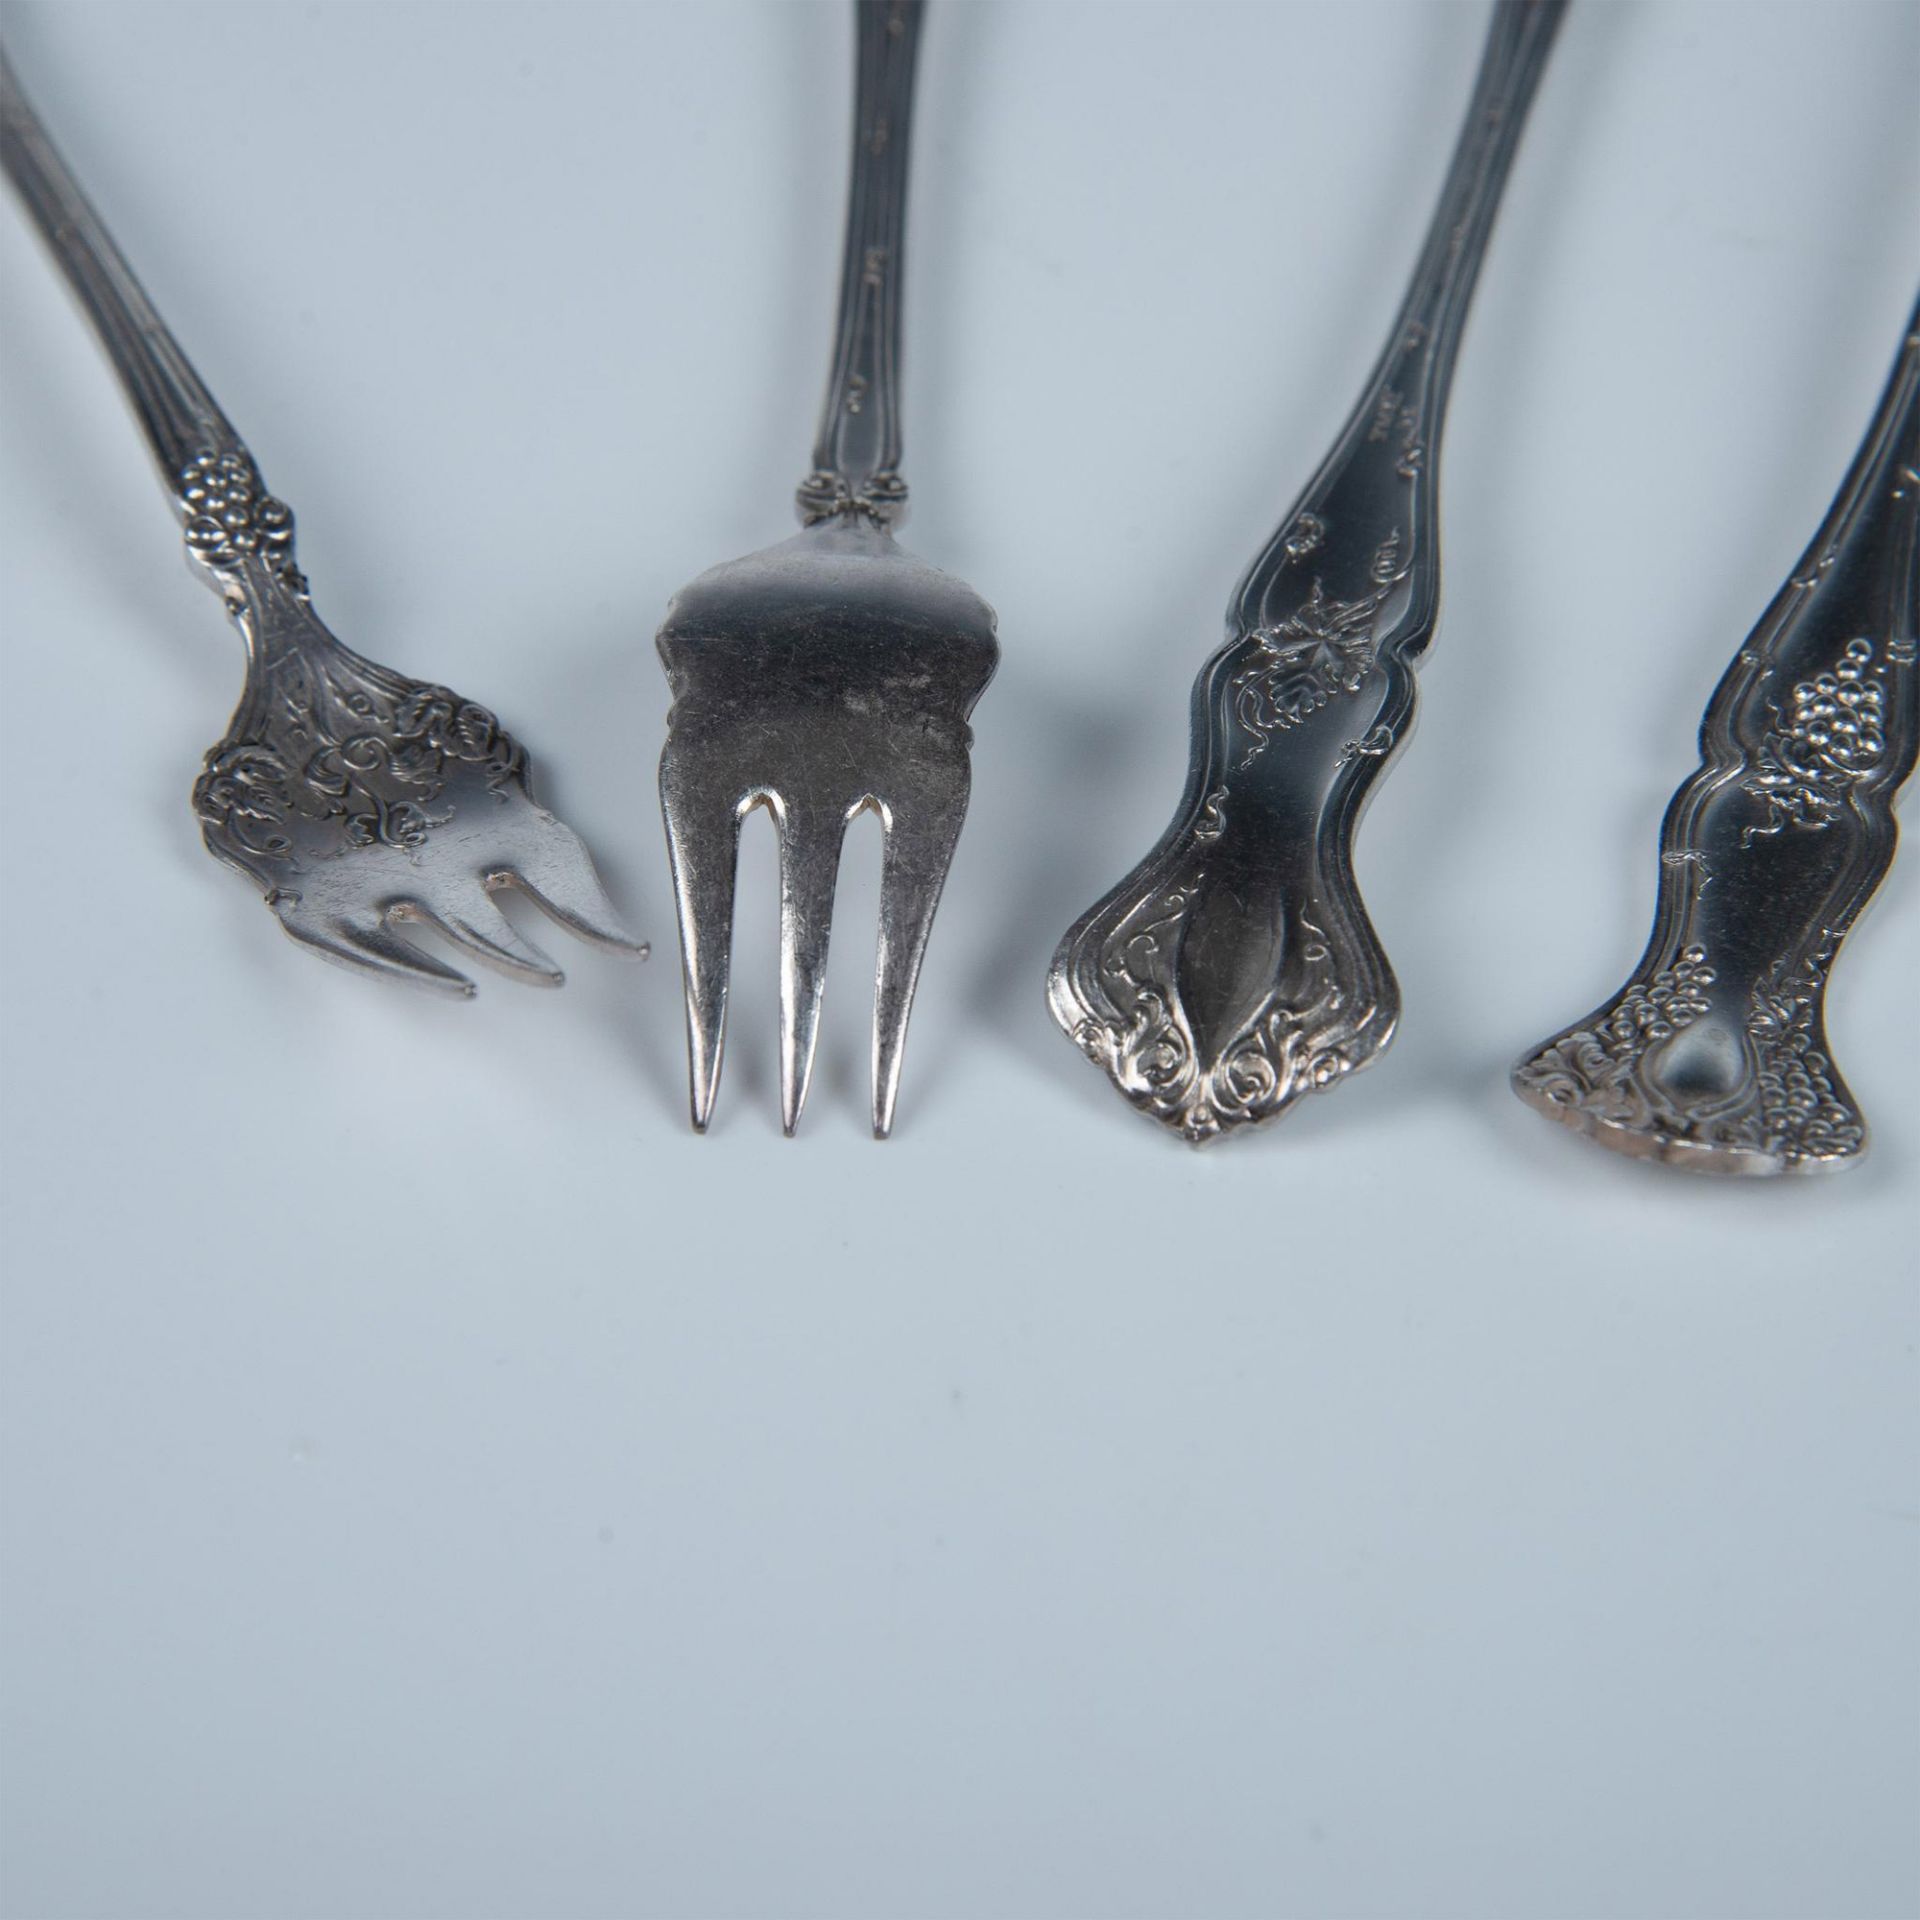 11pc Rogers Bros. 1847 Silverplate Oyster Forks, Vintage - Image 5 of 5